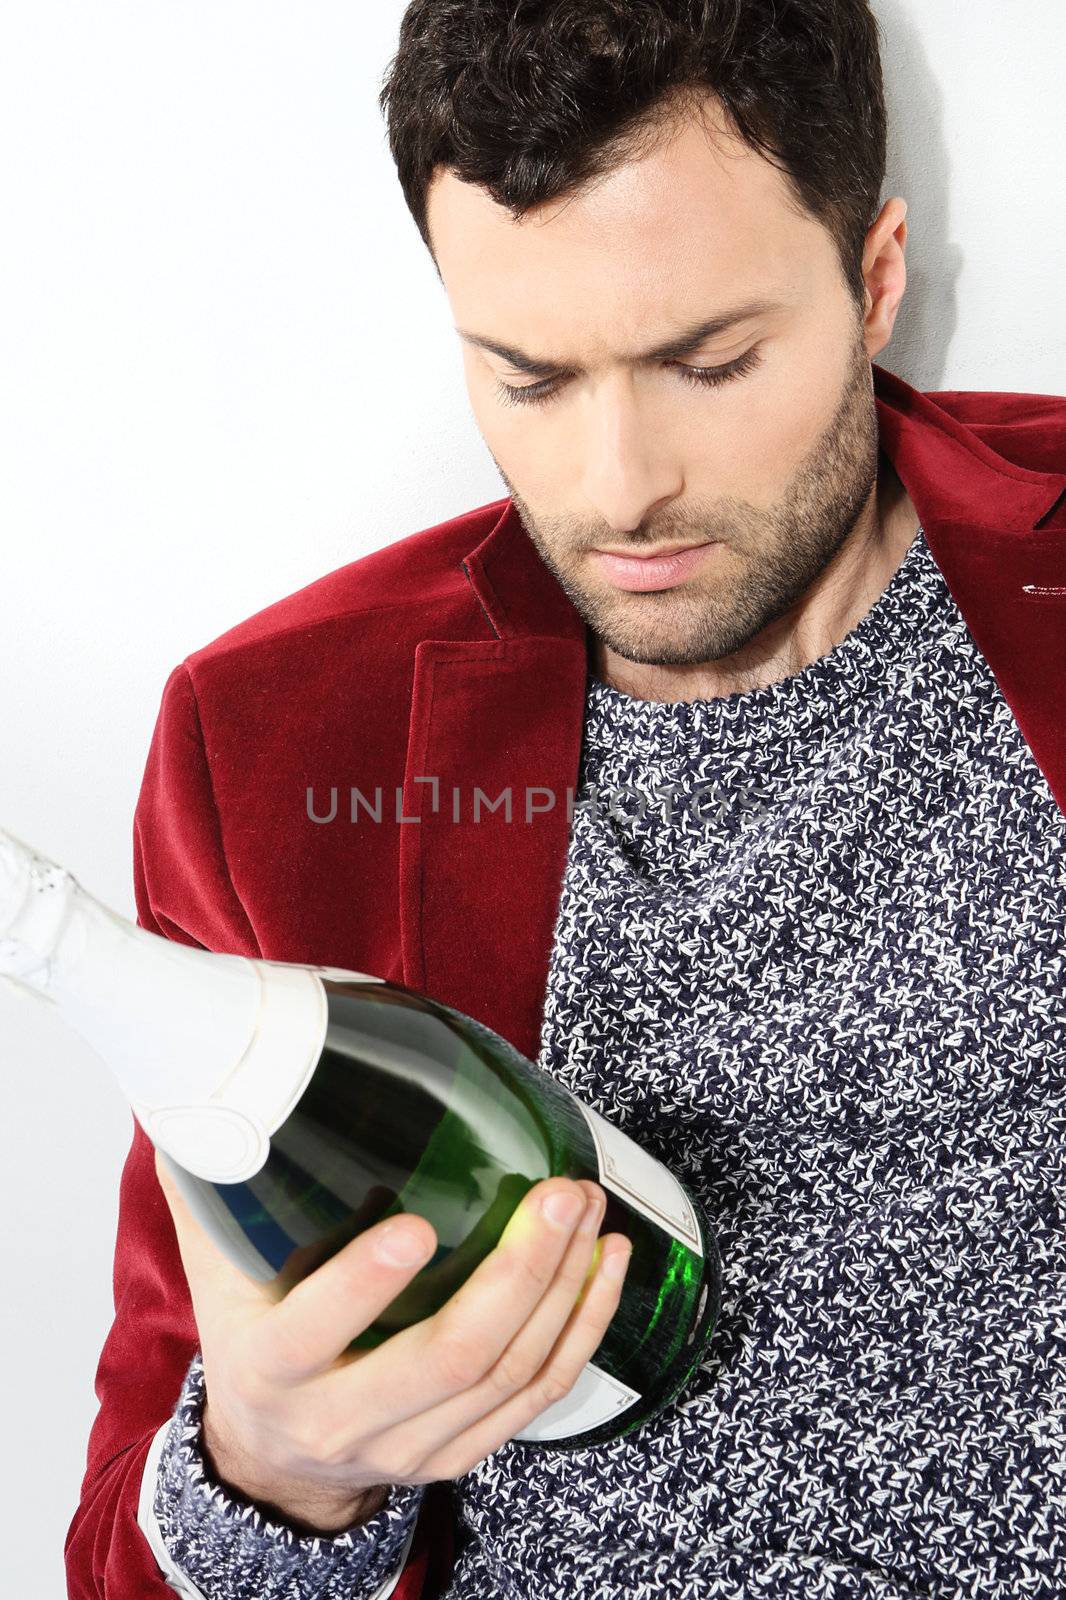 Portrait of male with a bottle of champagne